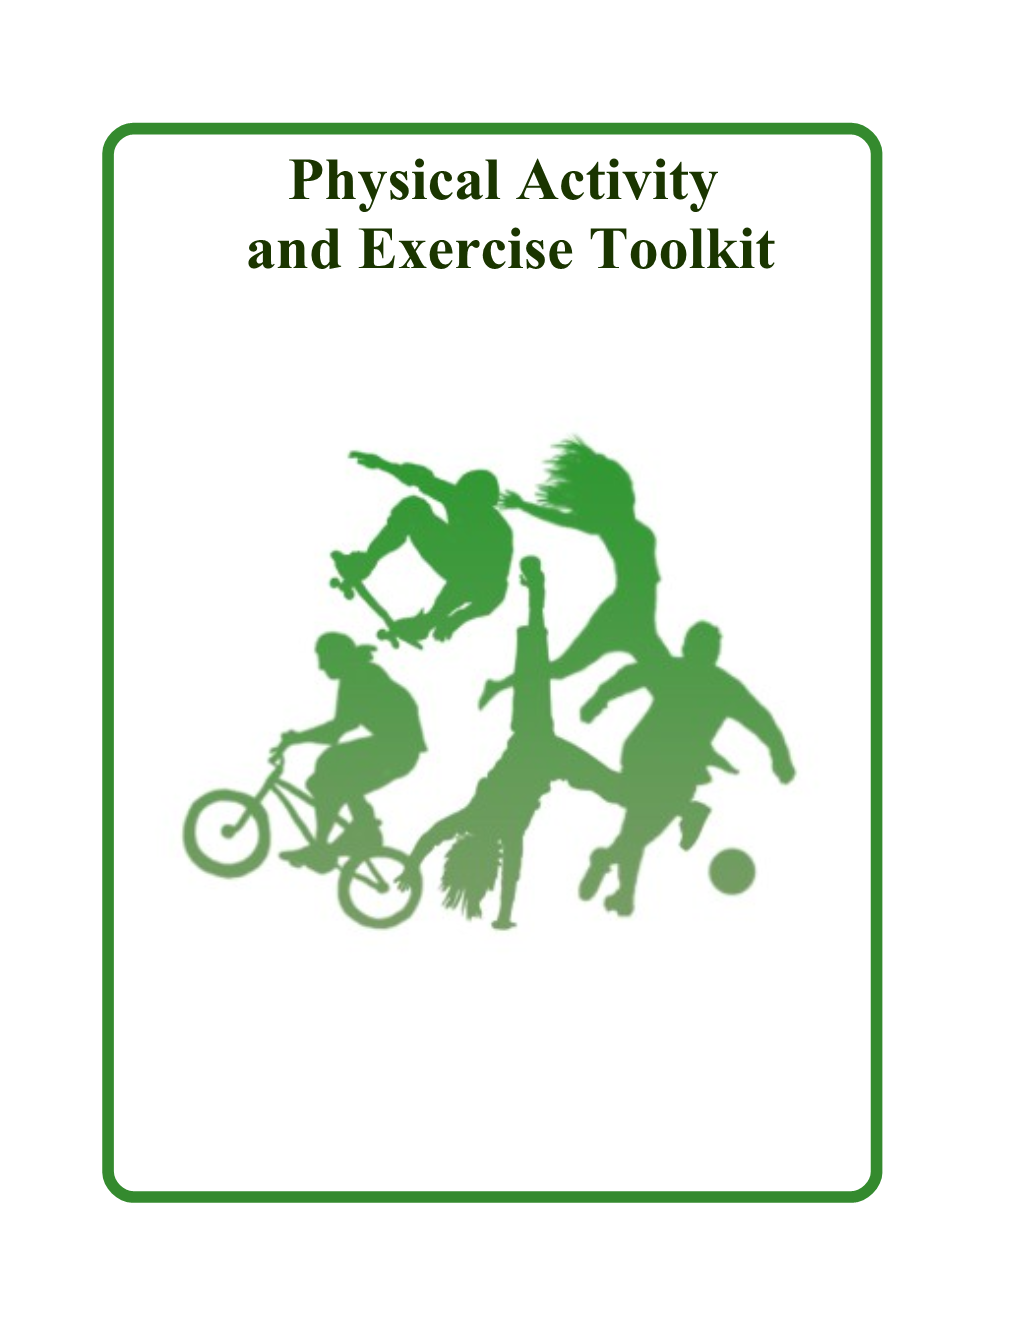 Physical Activity and Exercise Toolkit